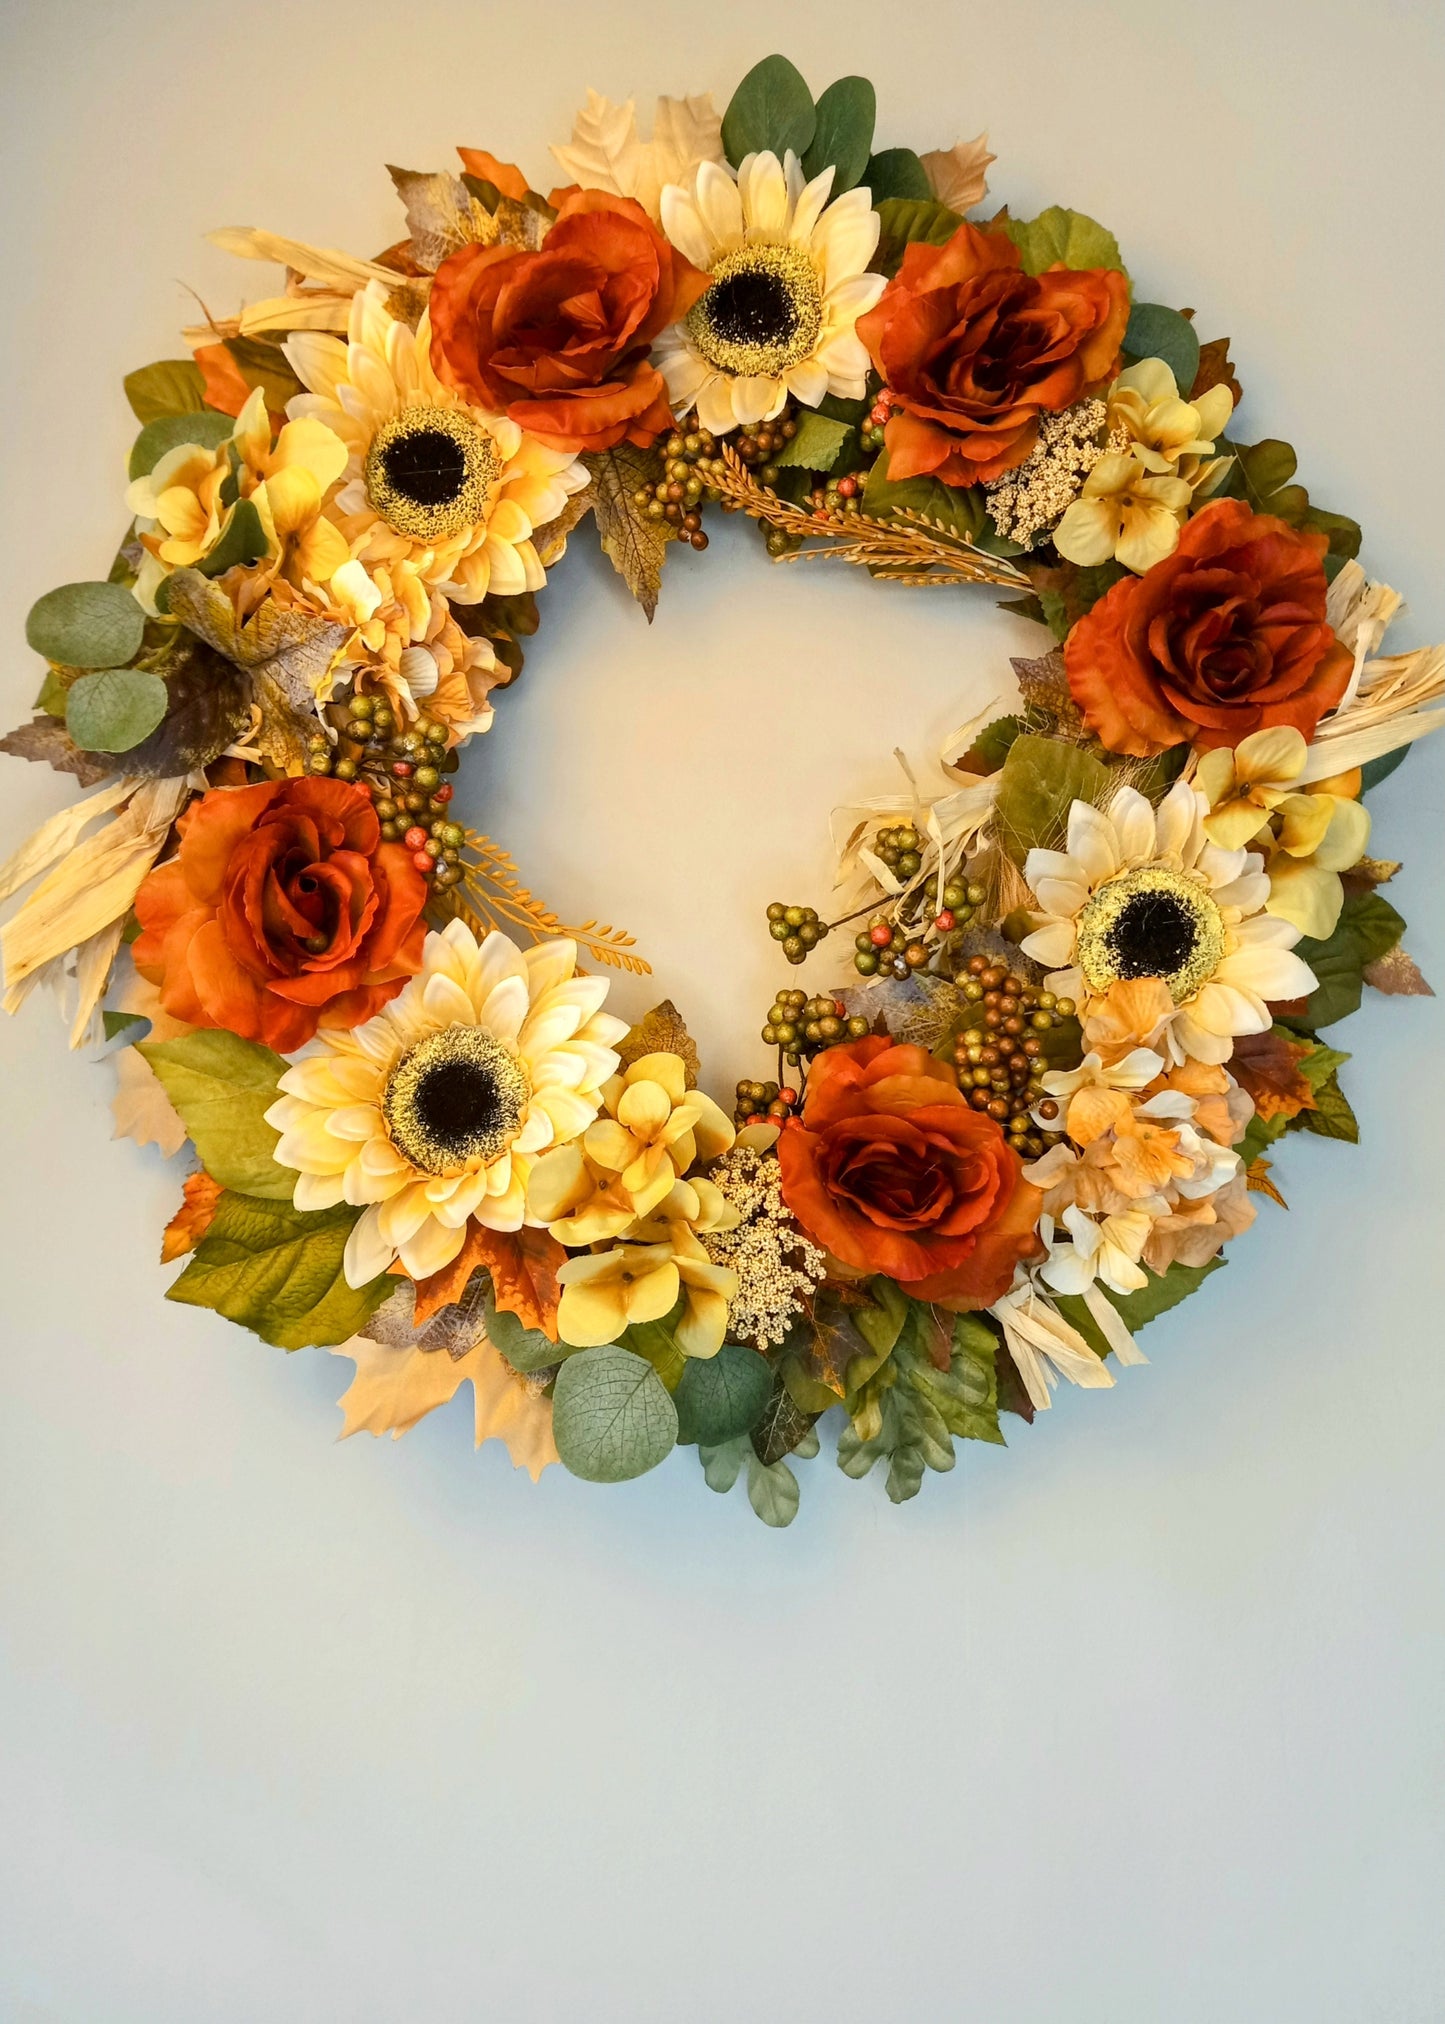 Fall Sale! Rustic Rose and Sunflower Fall Wreath